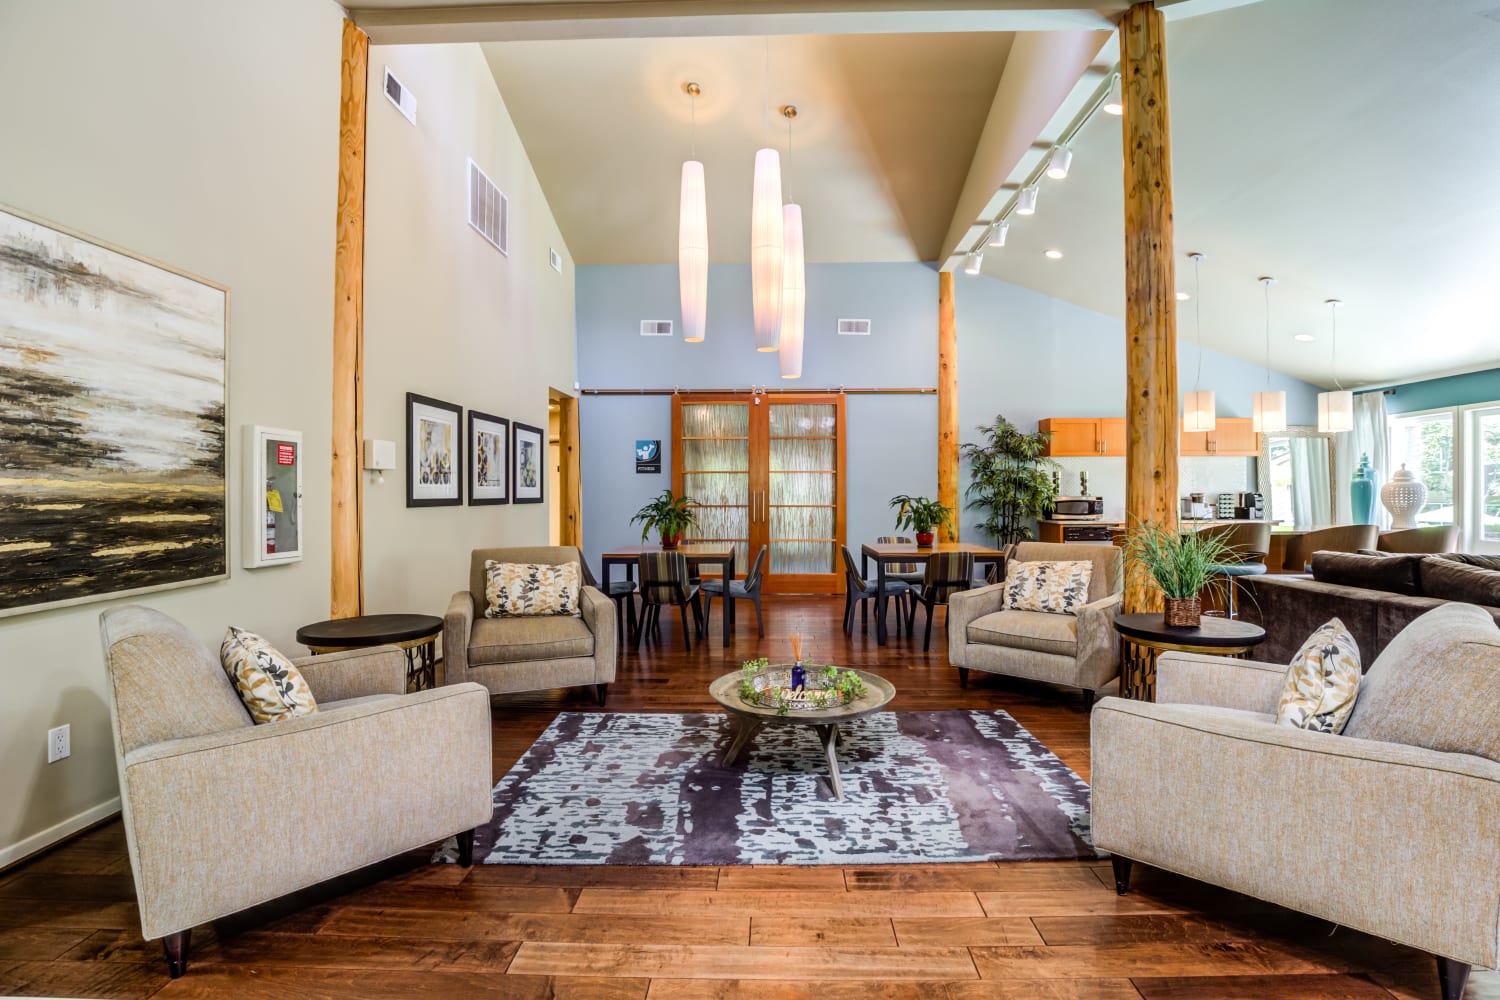 Clubhouse interior with community seating area and variety of decor at Vue Kirkland Apartments in Kirkland, Washington